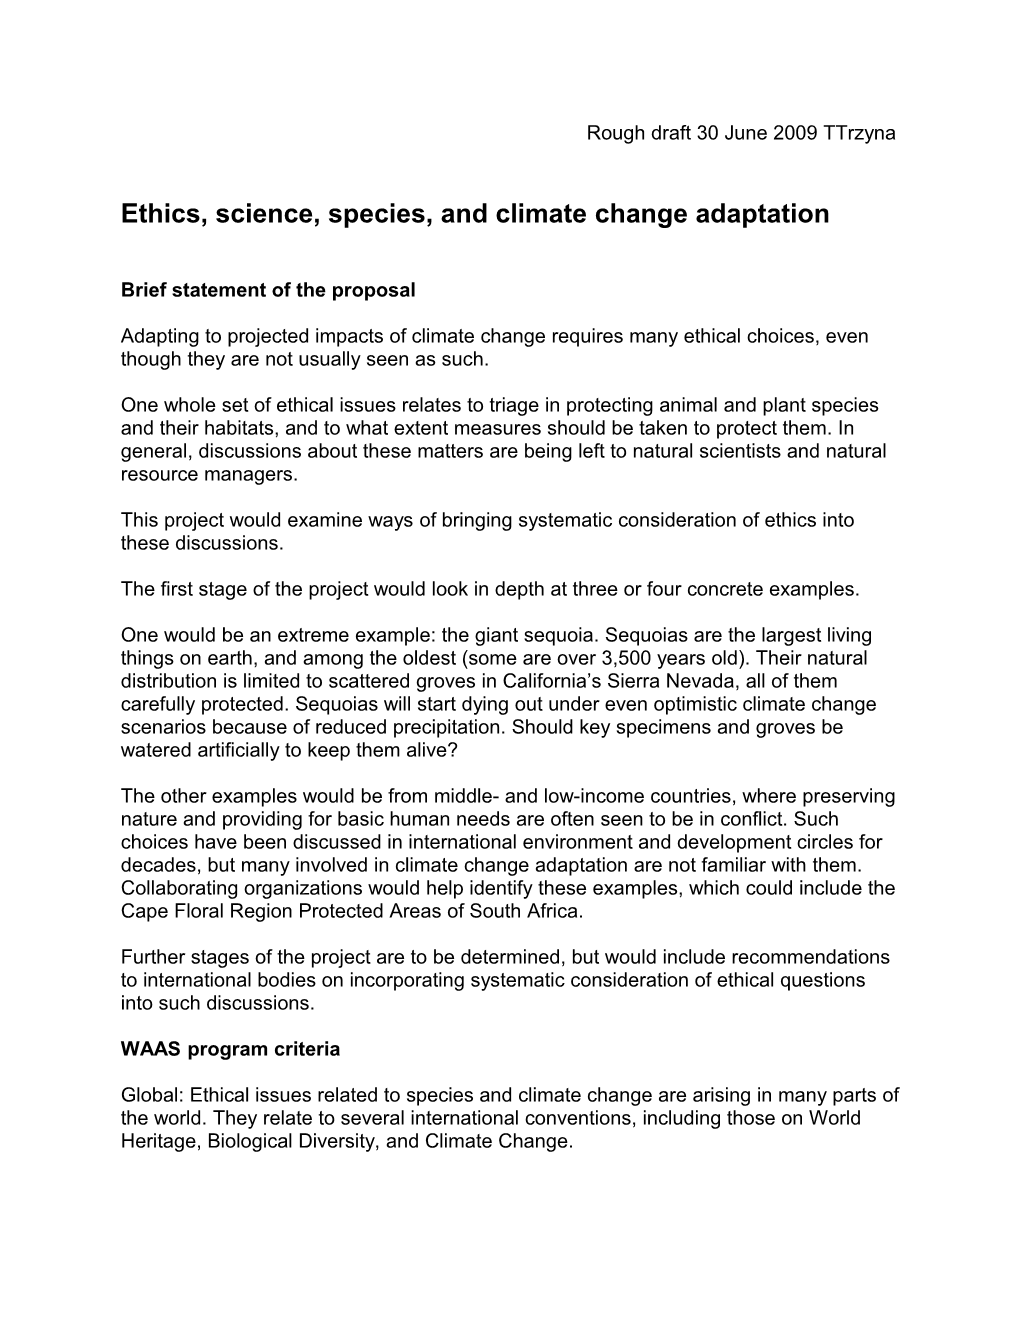 Ethics, Science, Species, and Climate Change Adaptation